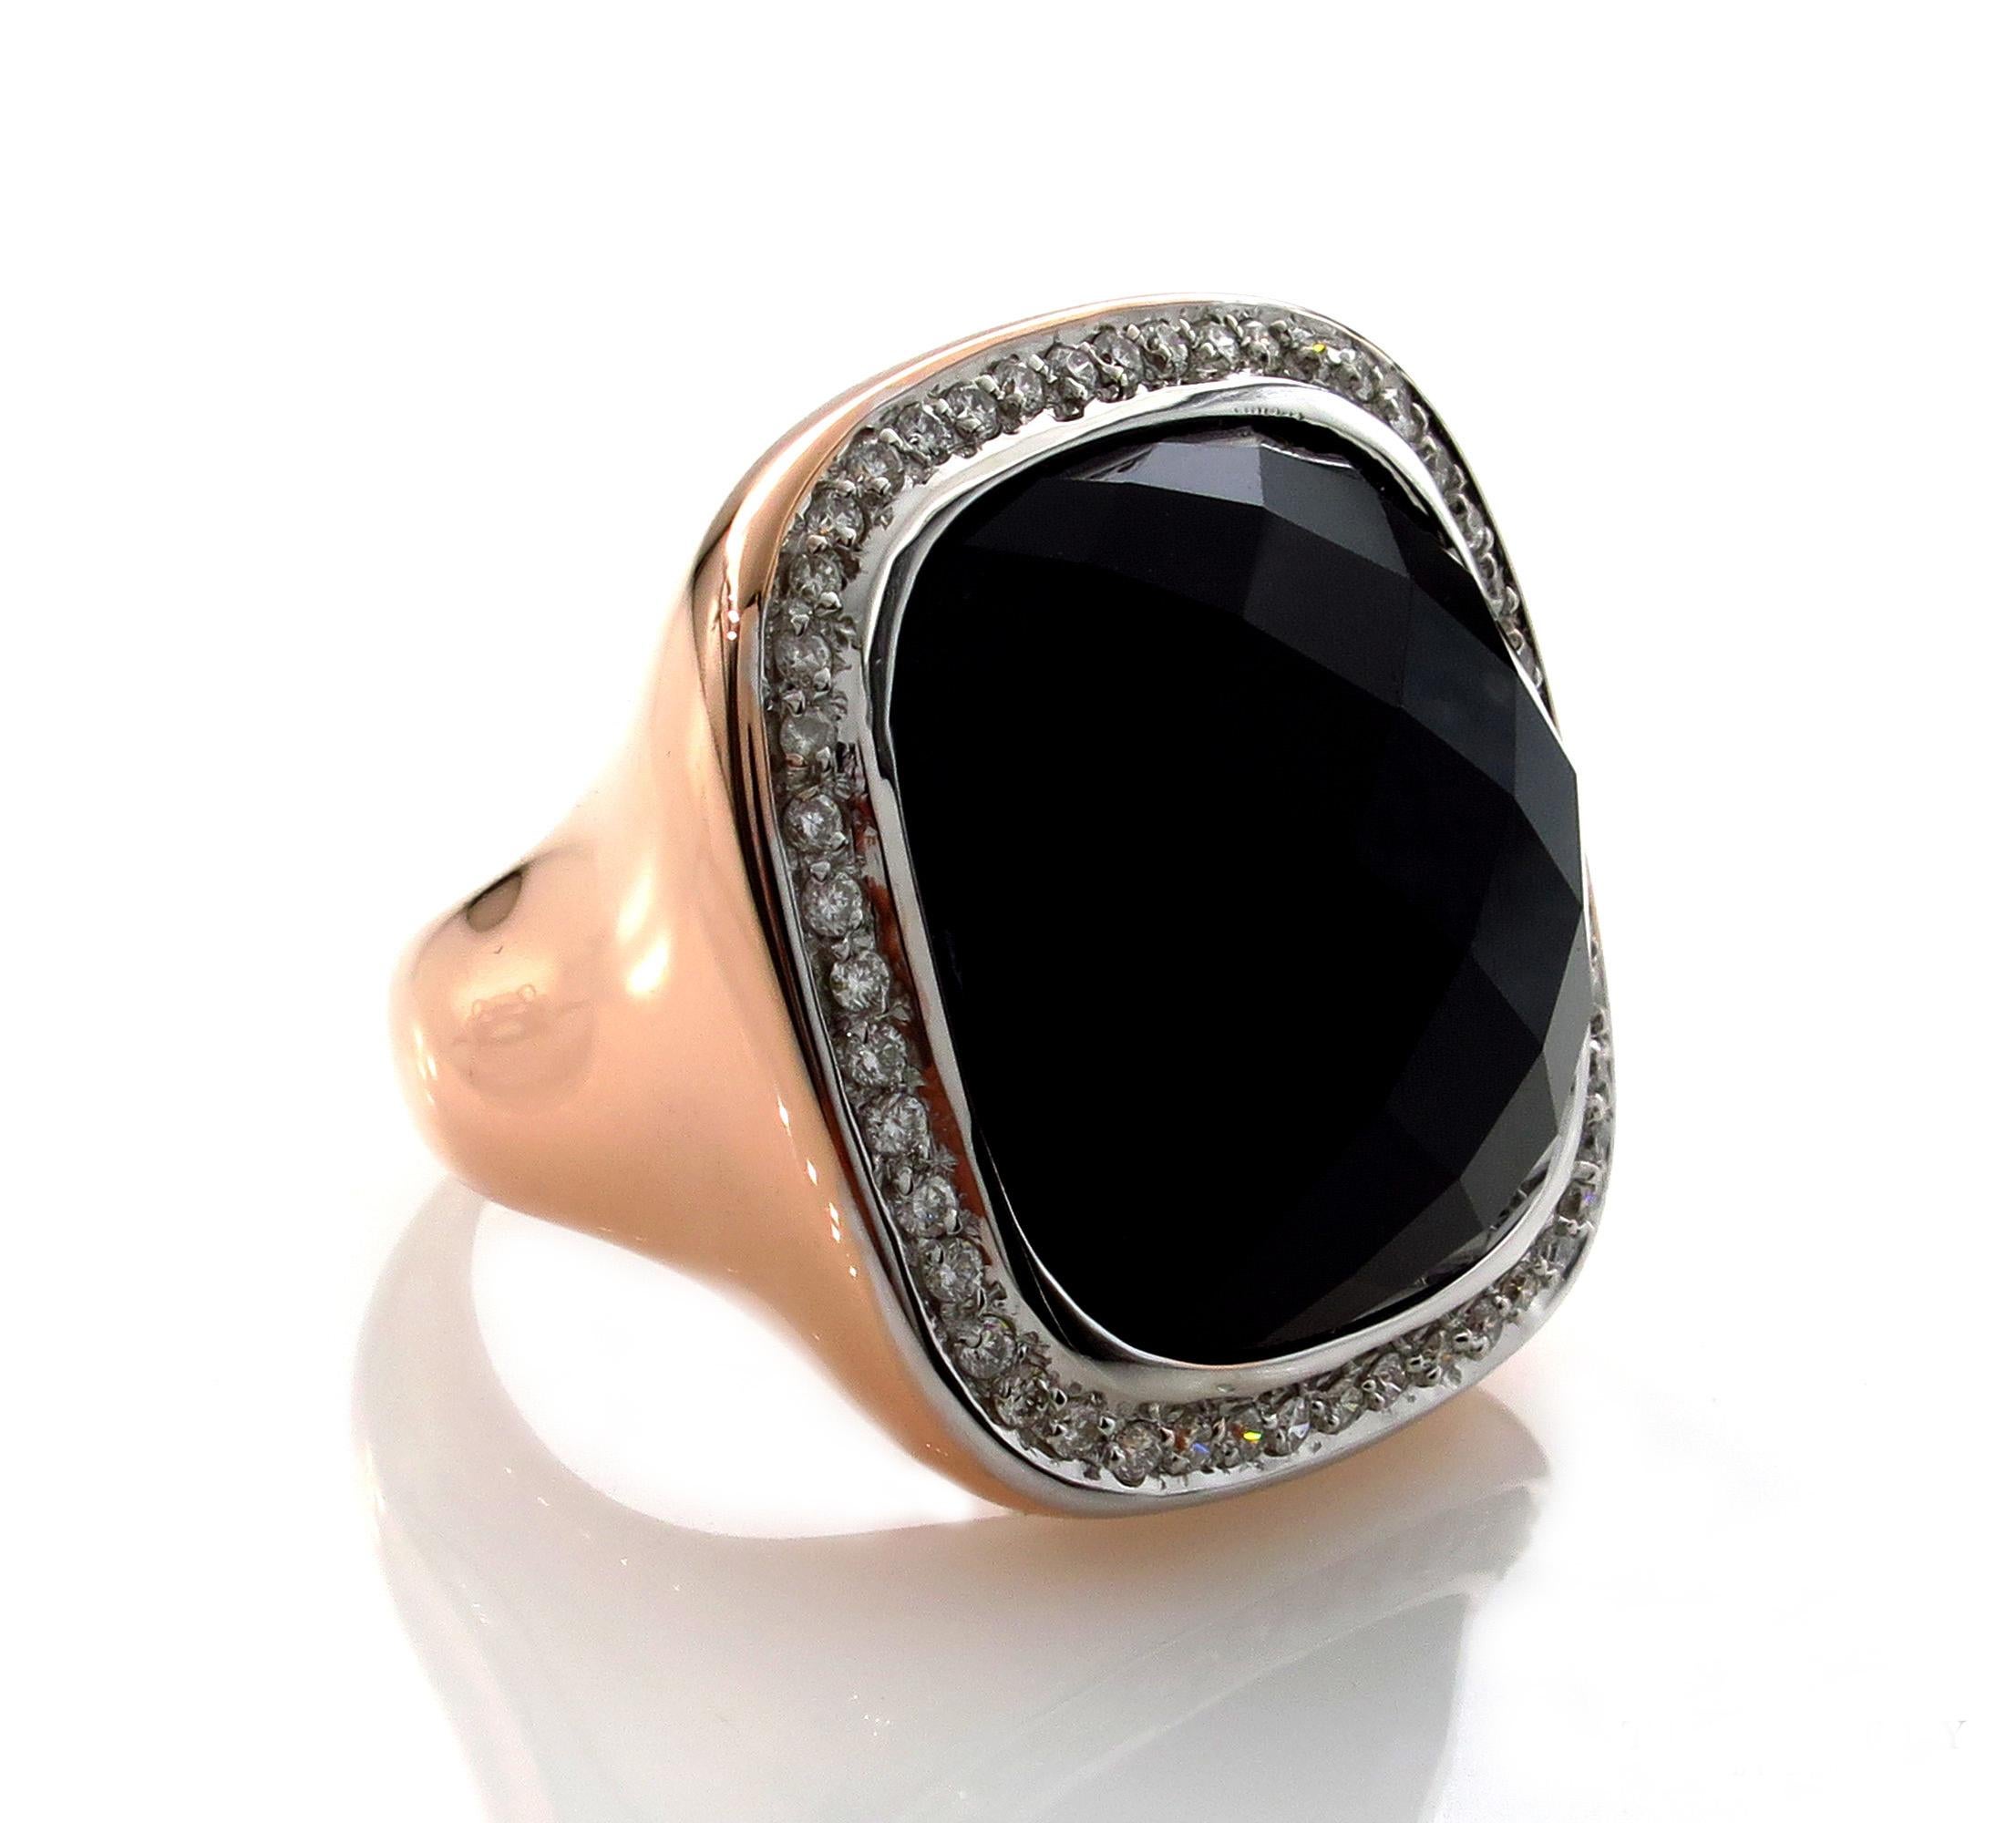 Bold and Fashionable Black Onyx Ring with Diamonds in bright and rich 18k Rose Gold.
A real Statement jewel, a great Right Hand or Anniversary Ring! From our Estate Collection. The ring is in 18K Rose Gold. The French cut Black Onyx is surrounded by